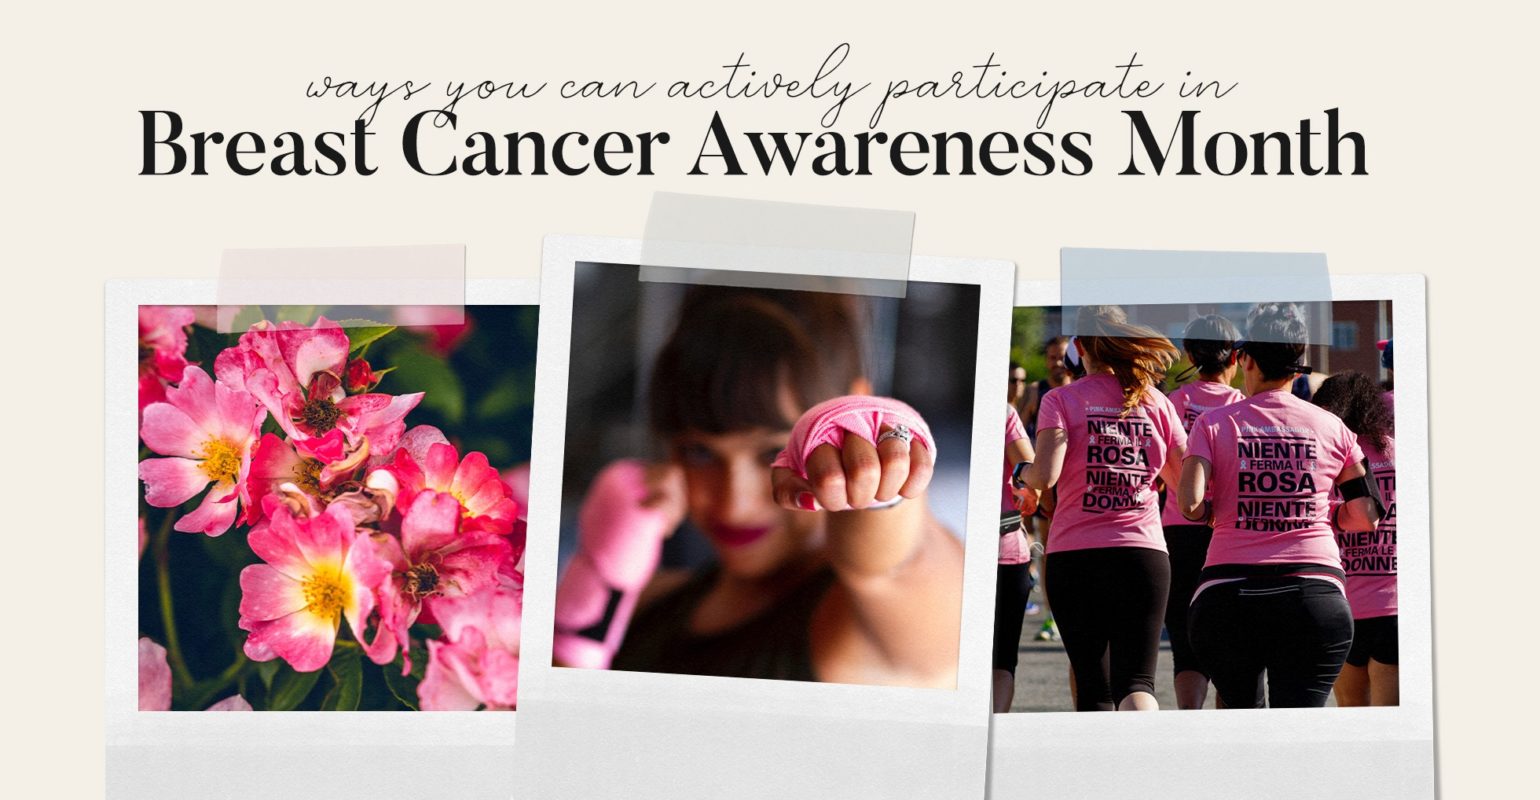 60 Ways You Can Actively Participate in Breast Cancer Awareness Month